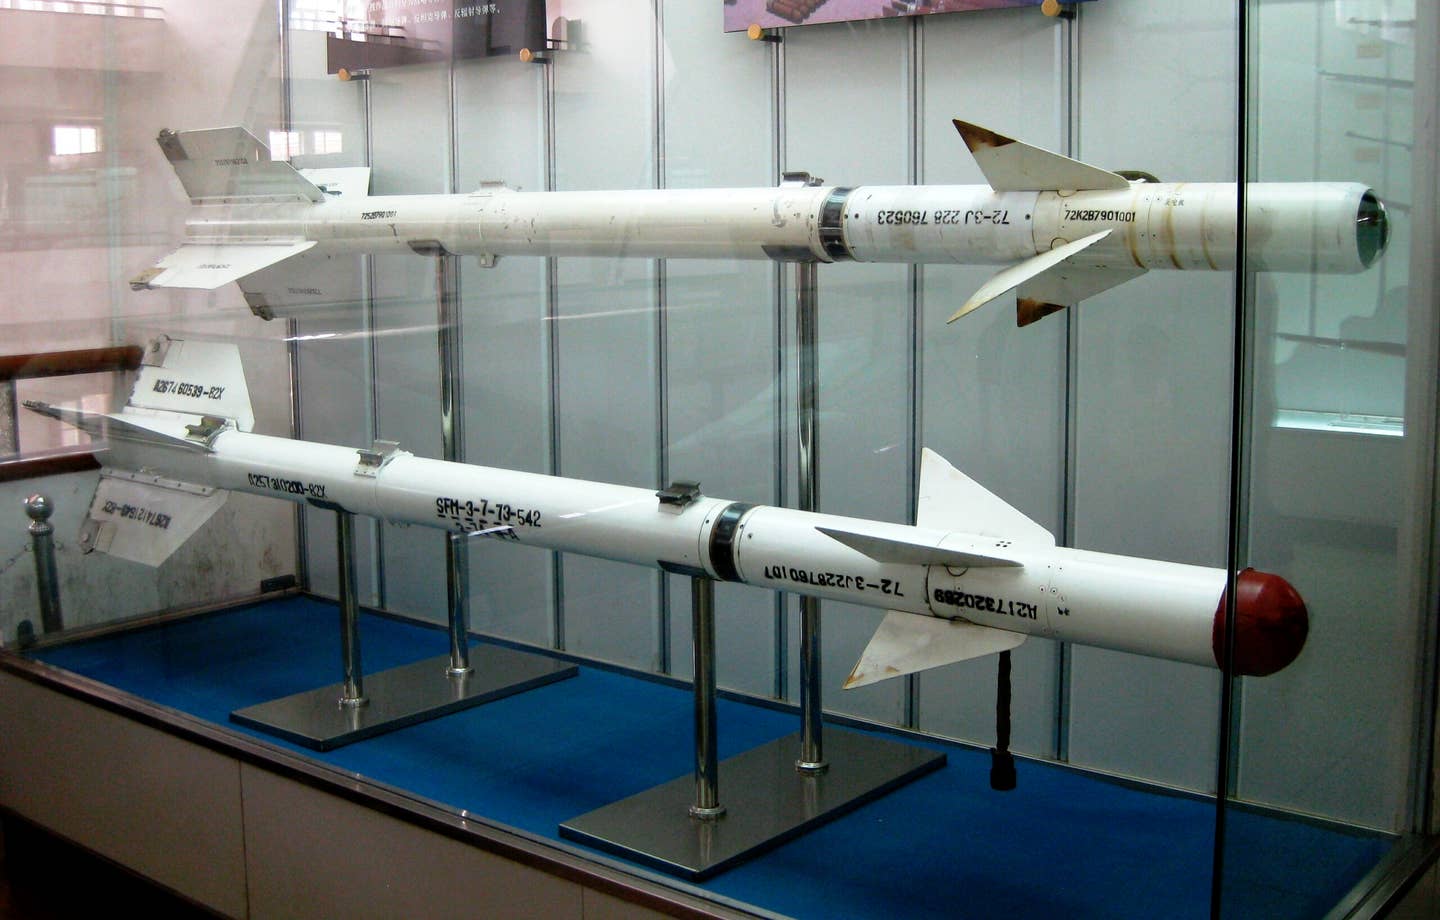 Early Chinese heat-seeking AAMs, apparently PL-2s, on display in the Military Museum of the Chinese People’s Revolution in Beijing. <em>Ryo Chijiiwa/Wikimedia Commons</em>